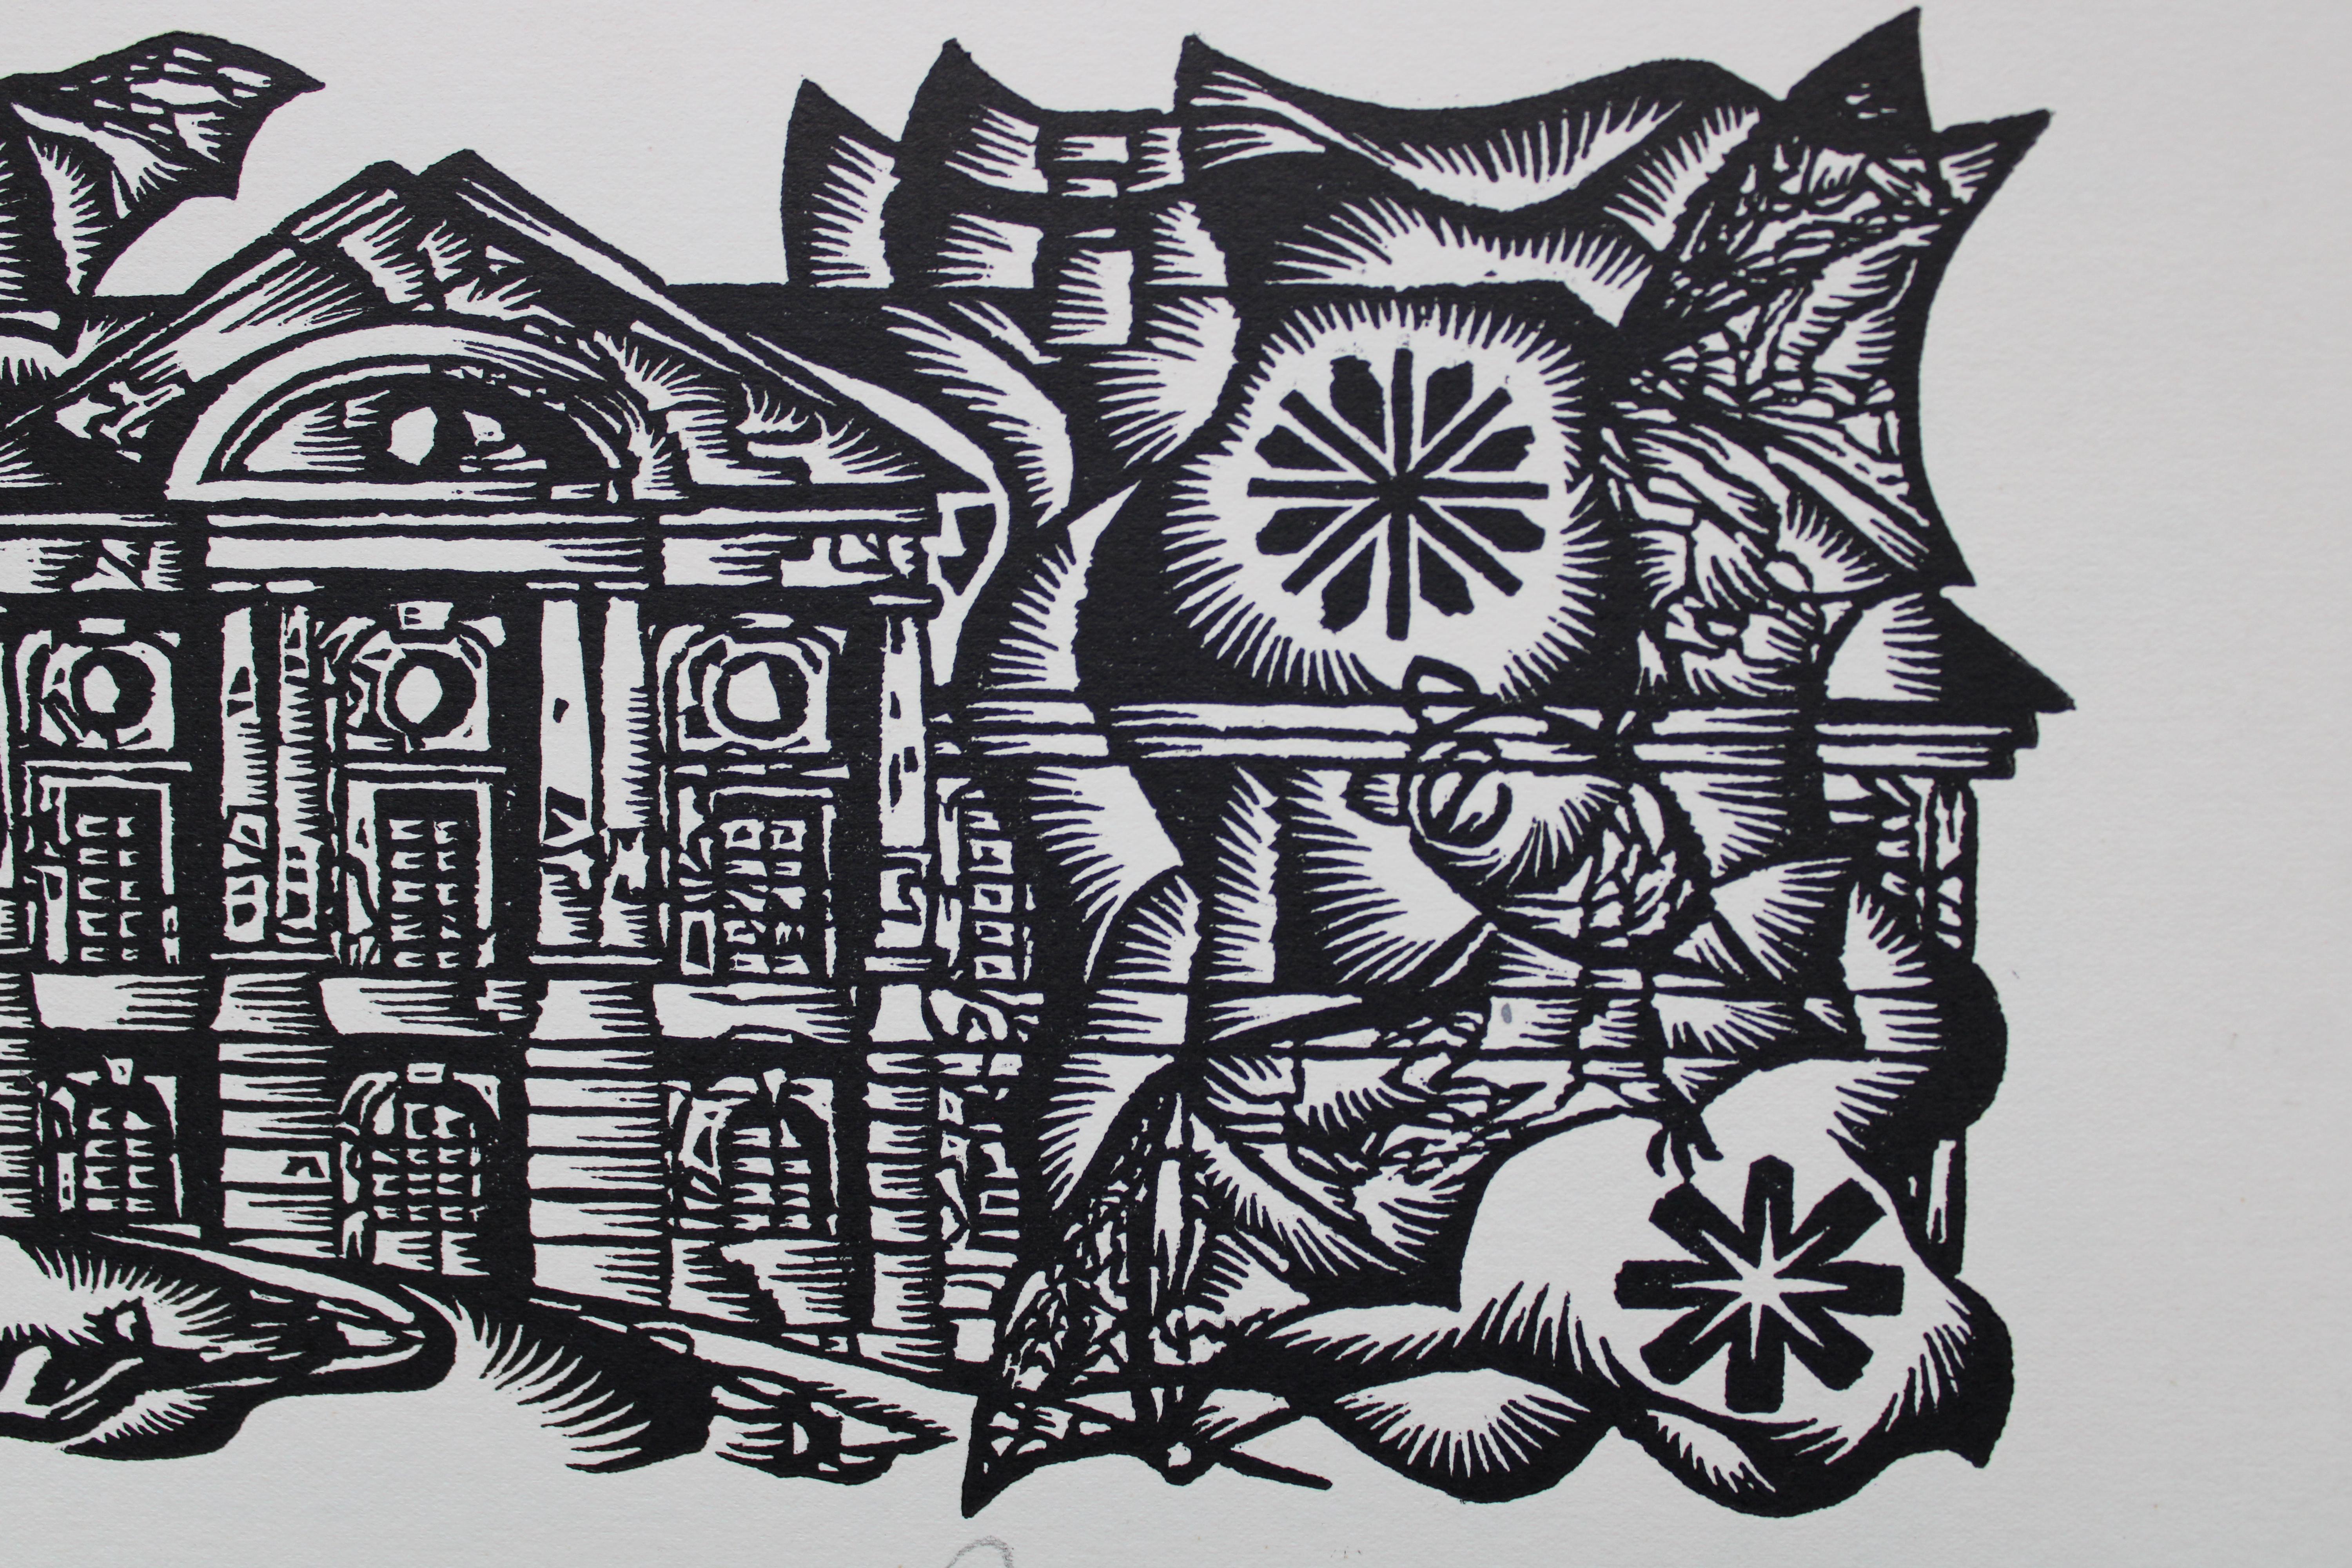 In slavery to the lord and manor. 1982. Paper, linocut, 25x34 cm - Gray Animal Print by Dainis Rozkalns